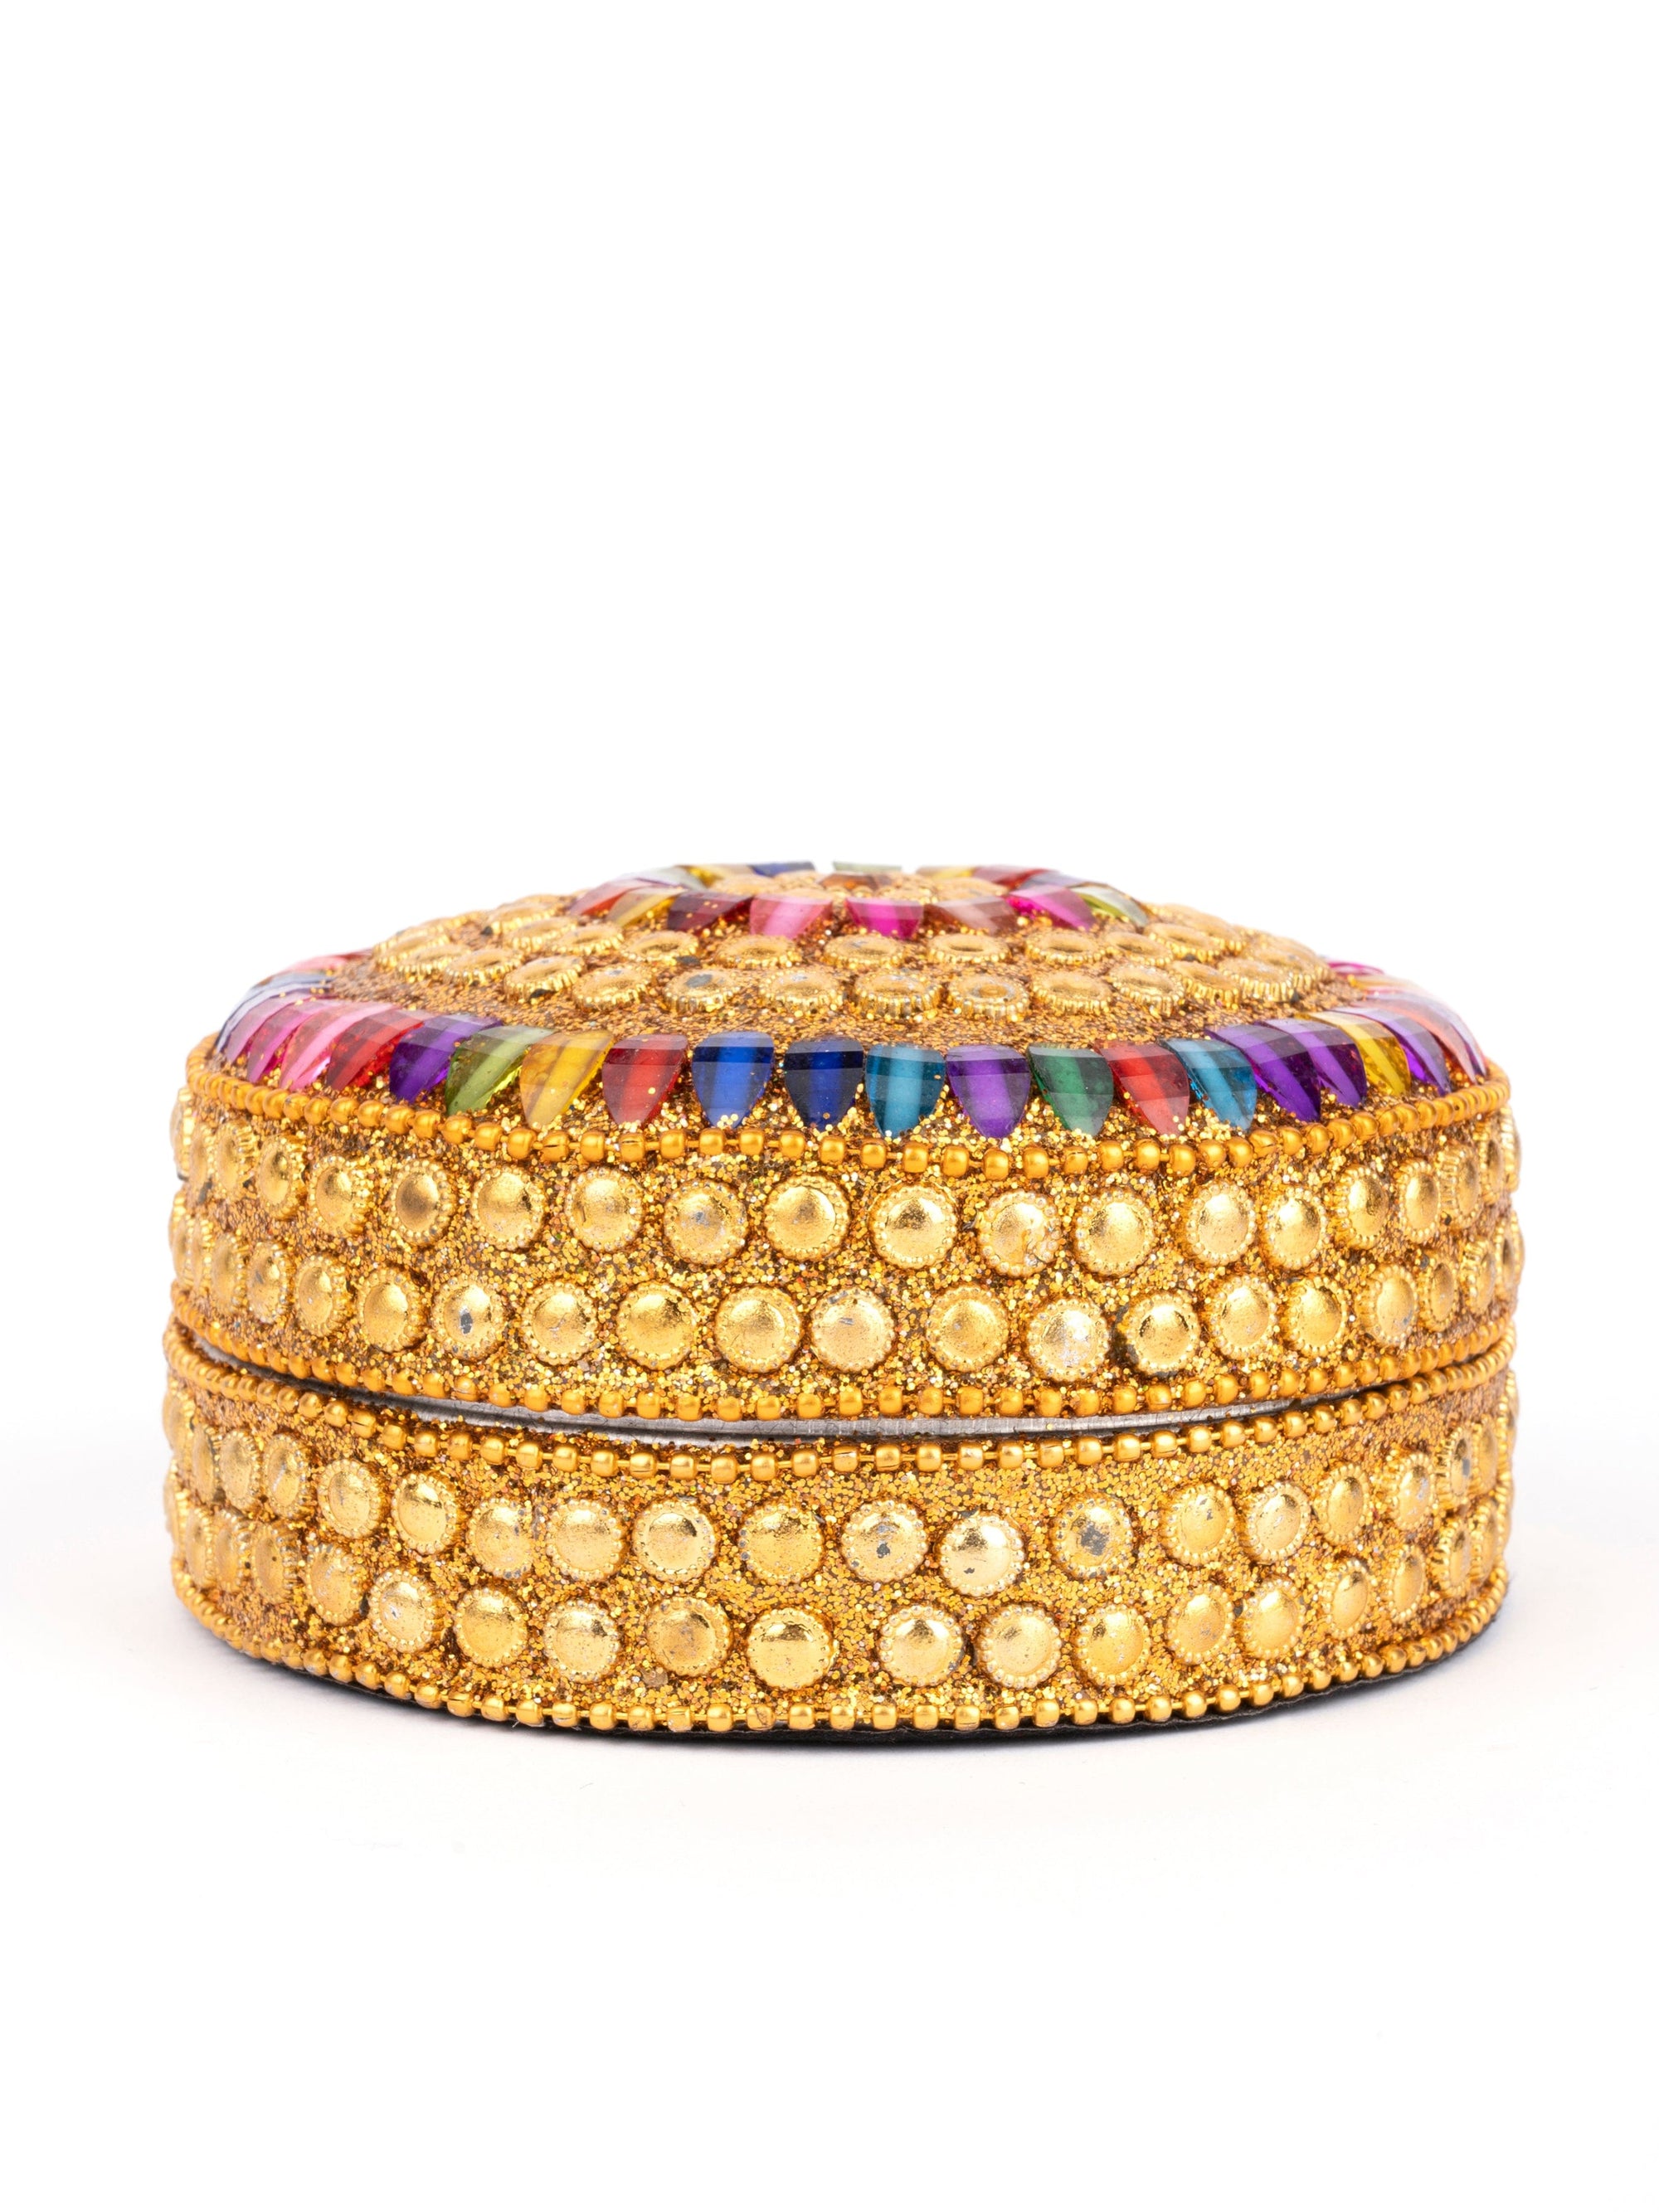 Moti Dibbi / Beaded Storage box, Ideal for Festive Gifting - 4 inches dia - The Heritage Artifacts